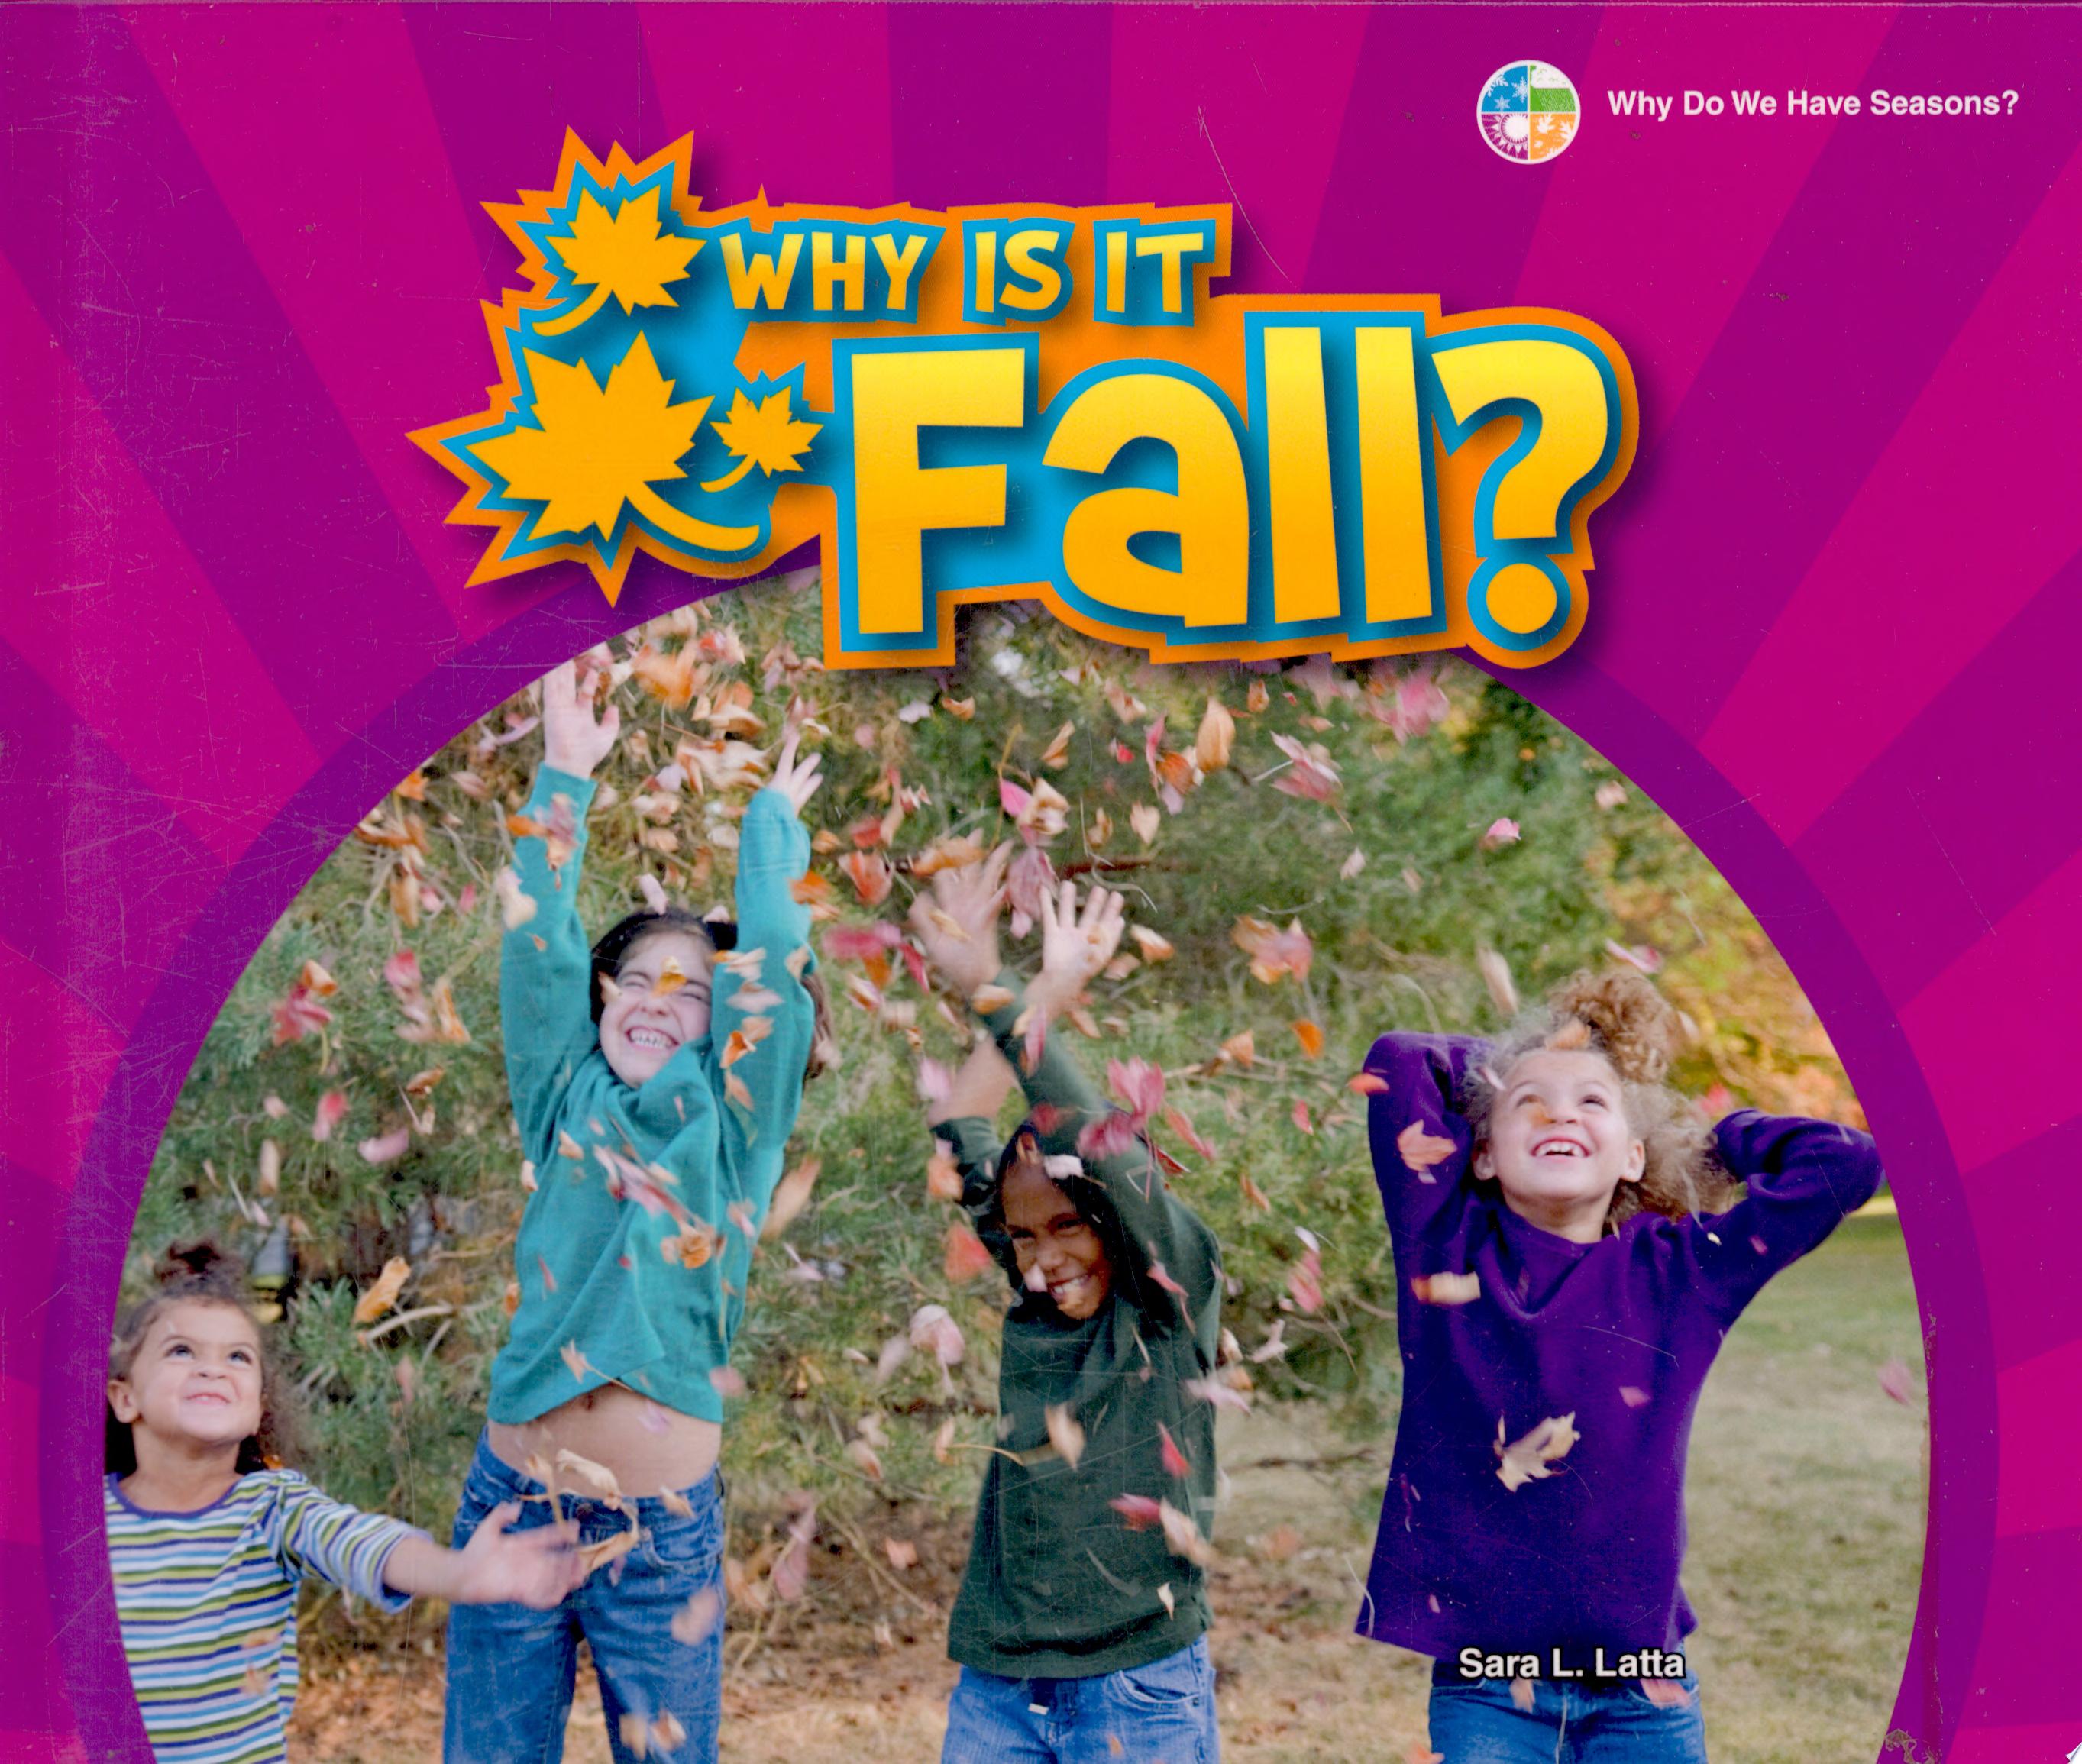 Image for "Why Is It Fall?"